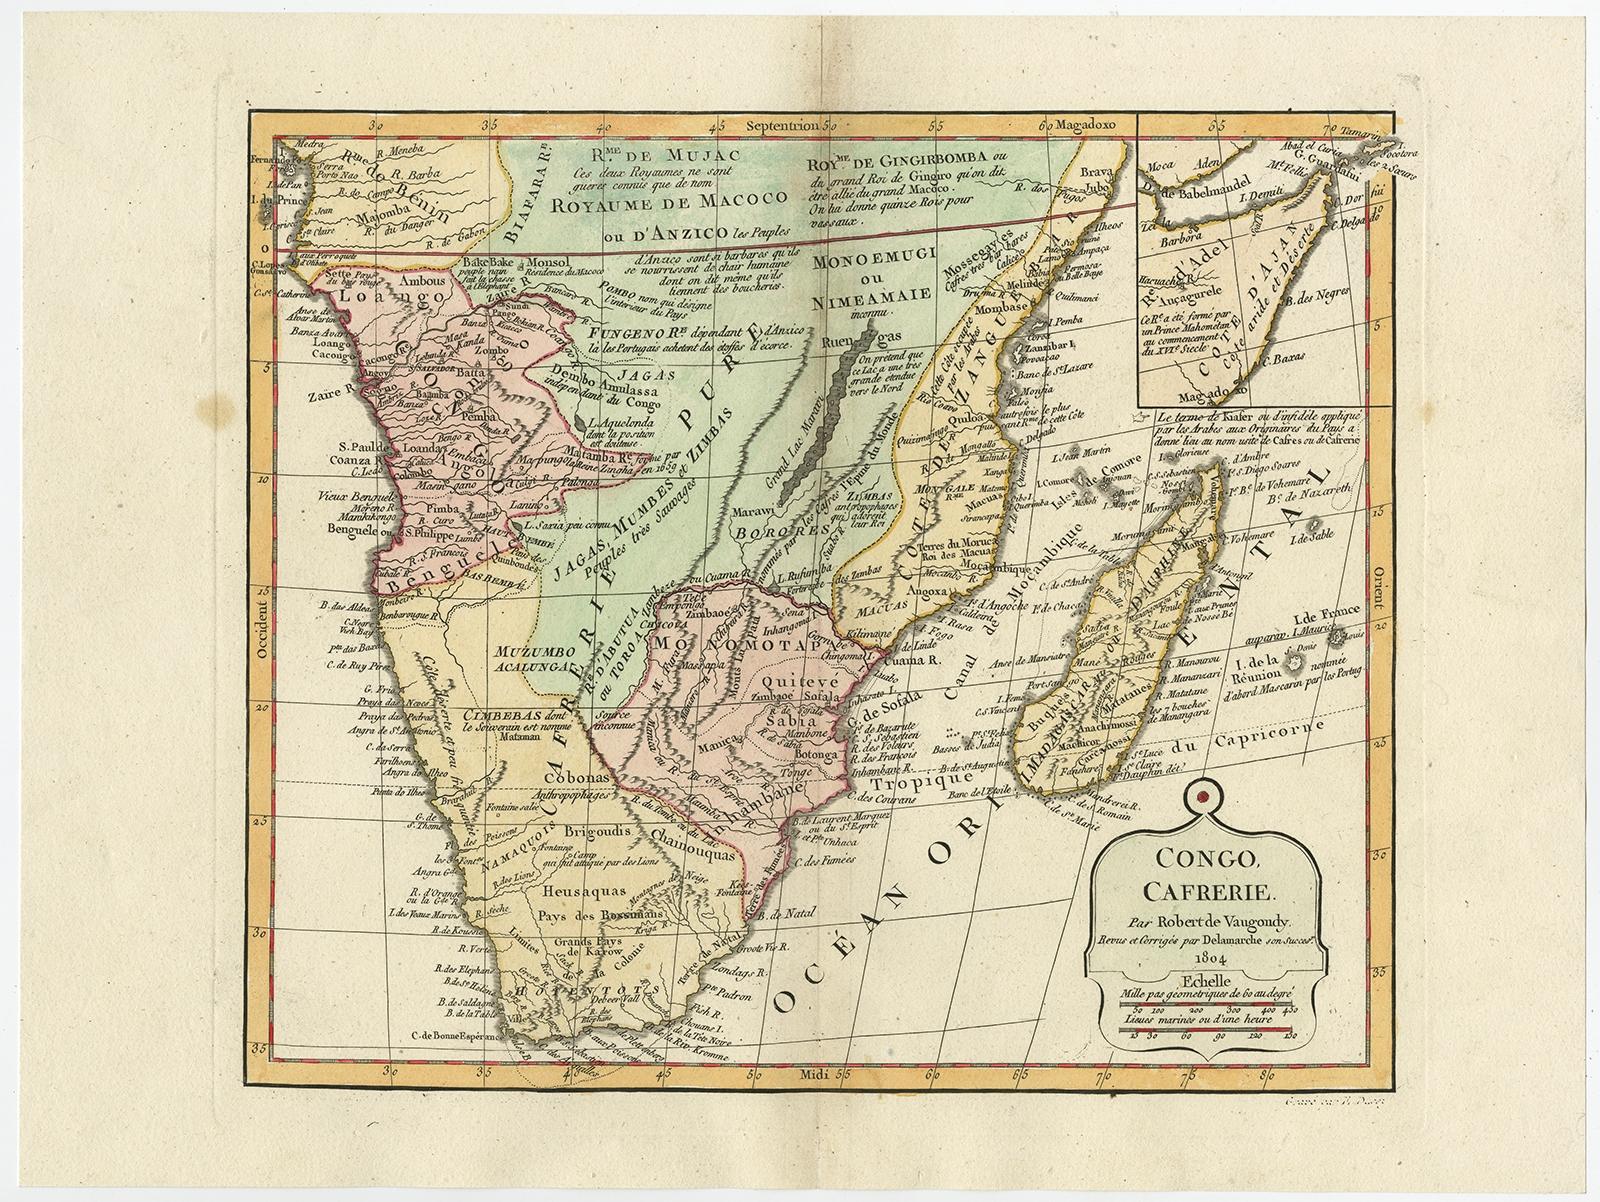 Antique map titled 'Congo, Cafrerie.' 

Decorative map of the southern part of Africa by Robert de Vaugondy, revised and published by Delamarche. Source unknown, to be determined.

Artists and Engravers: Charles Francois Delamarche (1740-1817)